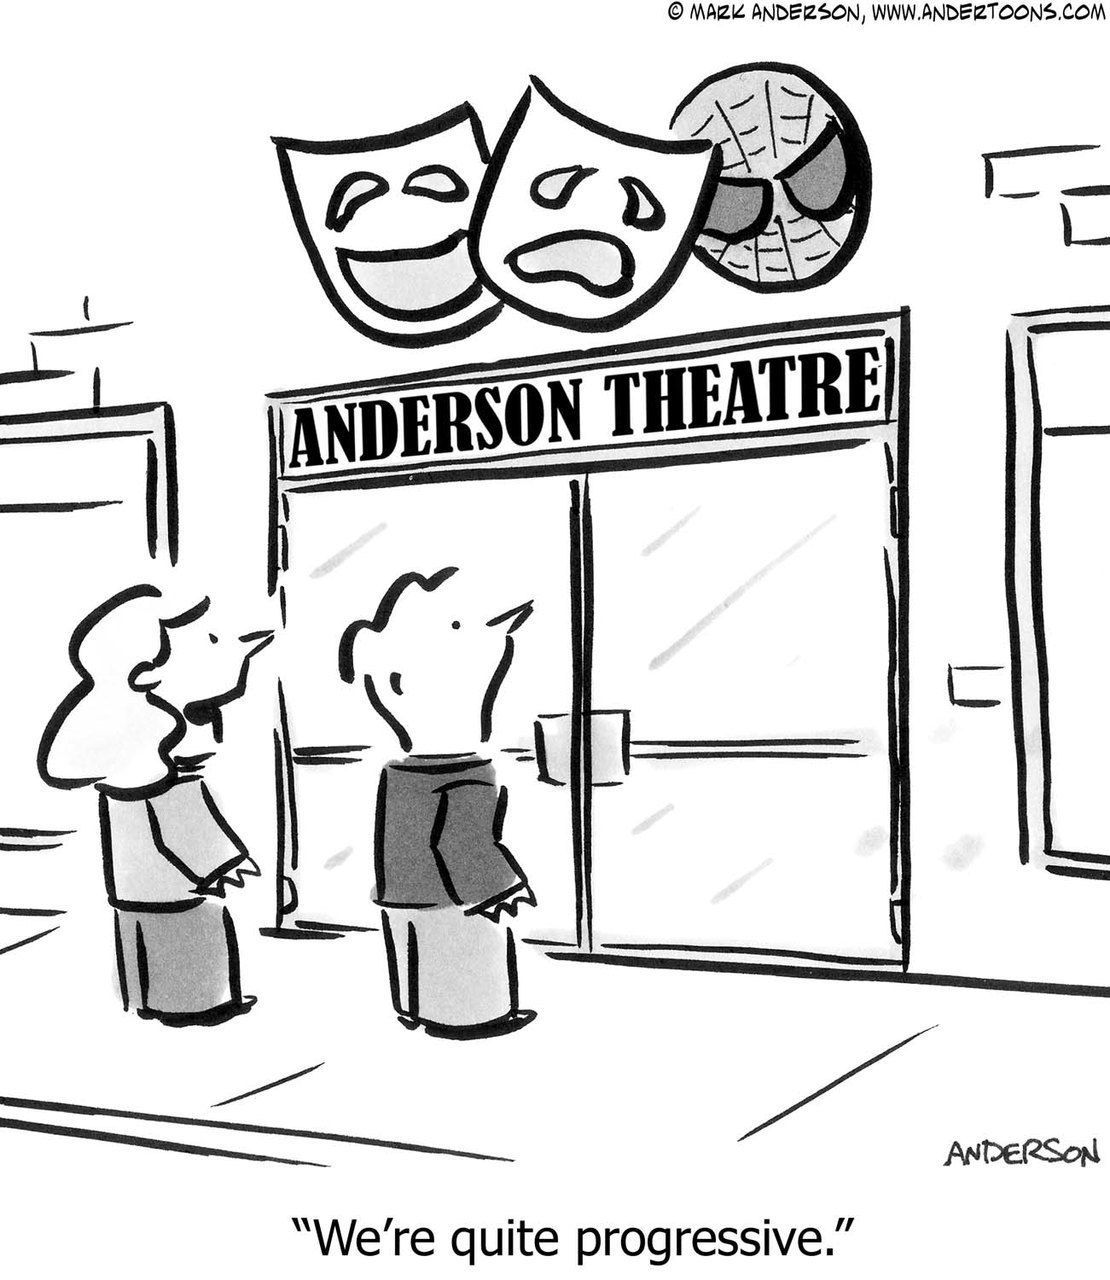 Theater Cartoon, Reality Theater Cartoons and Comics picture from CartoonStock Cartoon Theater. Cartoon Theater Kulisya On A White Background. Theate